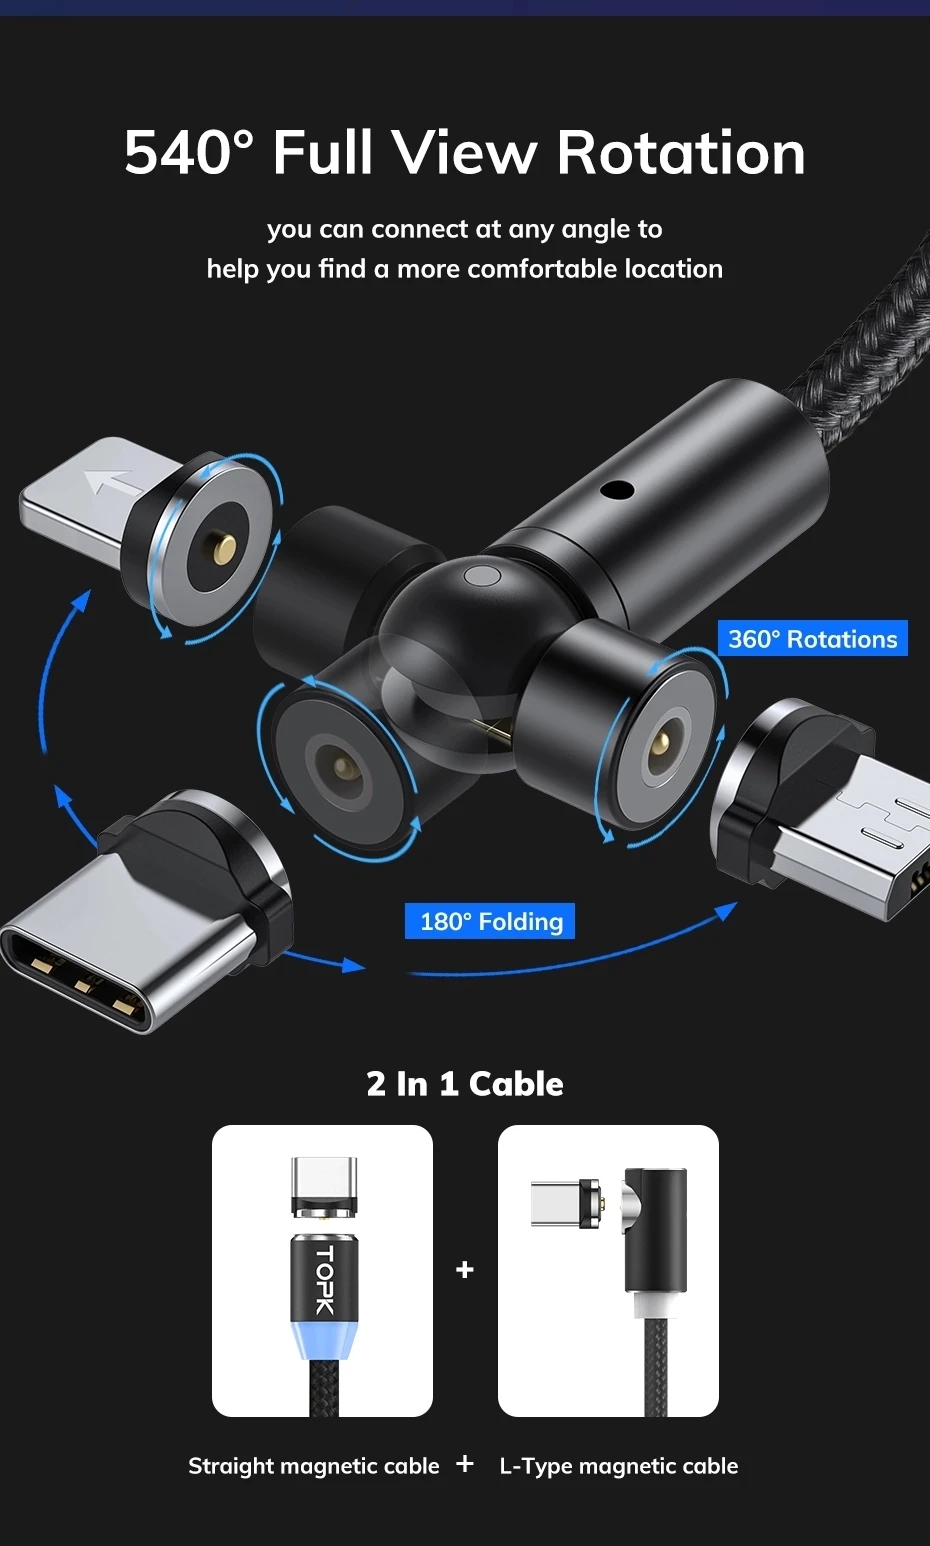 2Pcs-Black-TOPK-AM68-3-In-1-Magnetic-Cable-540deg-Rotation-Elbow-LED-Indicator-Fast-Charging-Data-Tr-1843192-2